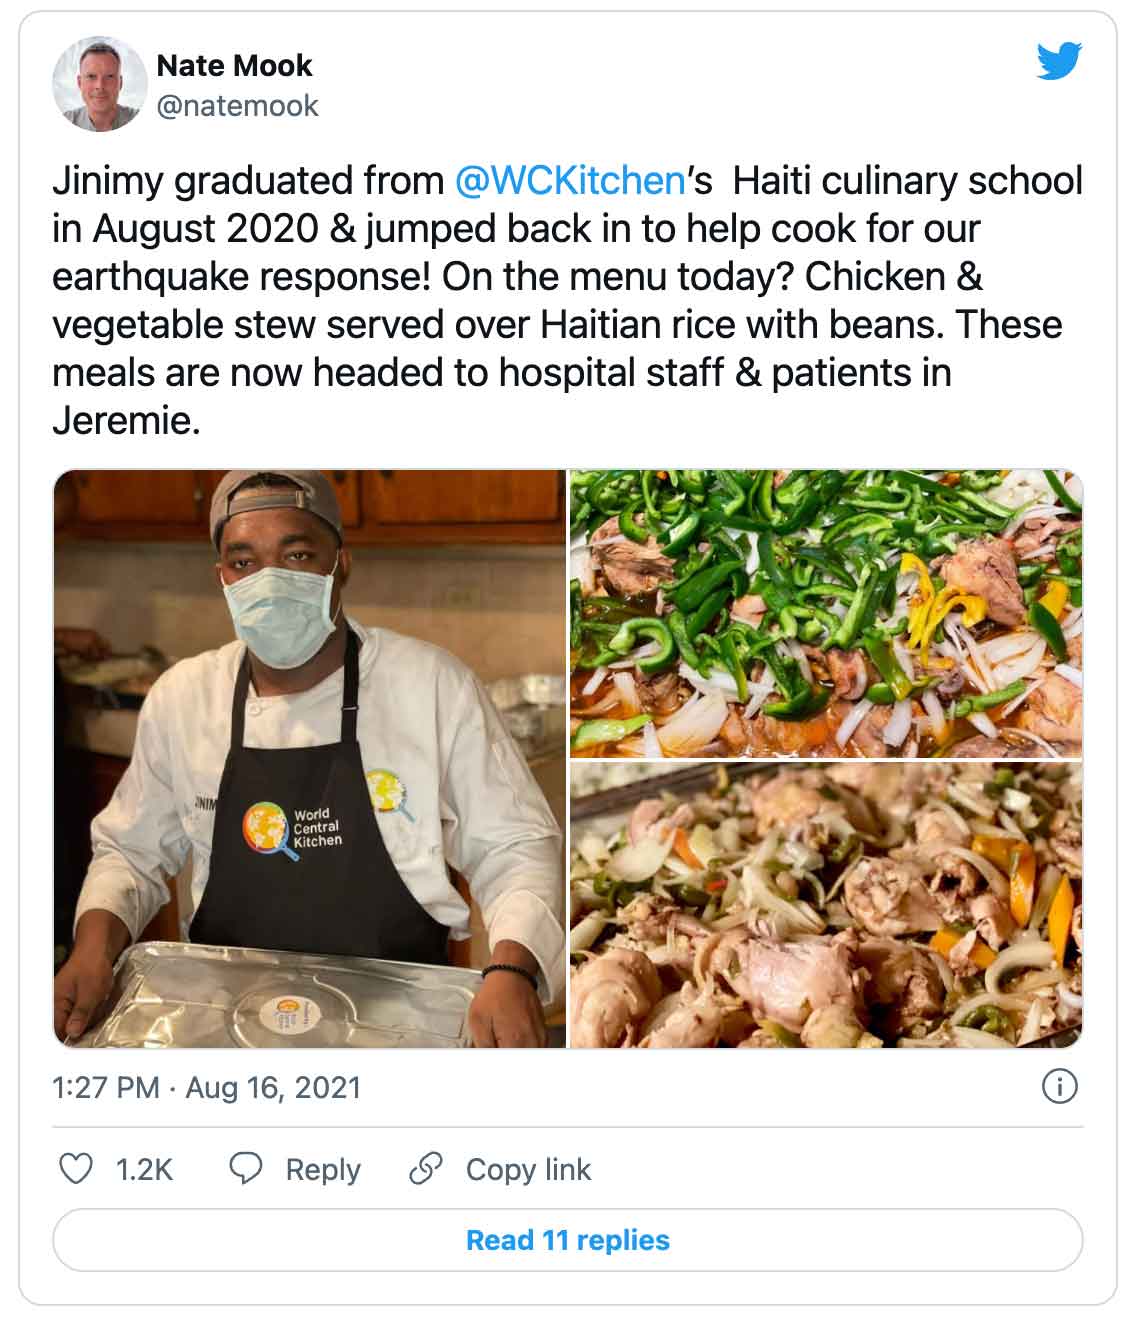 Tweet: Nate Mook @natemook Jinimy graduated from  @WCKitchen ’s  Haiti culinary school in August 2020 & jumped back in to help cook for our earthquake response! On the menu today? Chicken & vegetable stew served over Haitian rice with beans. These meals are now headed to hospital staff & patients in Jeremie.